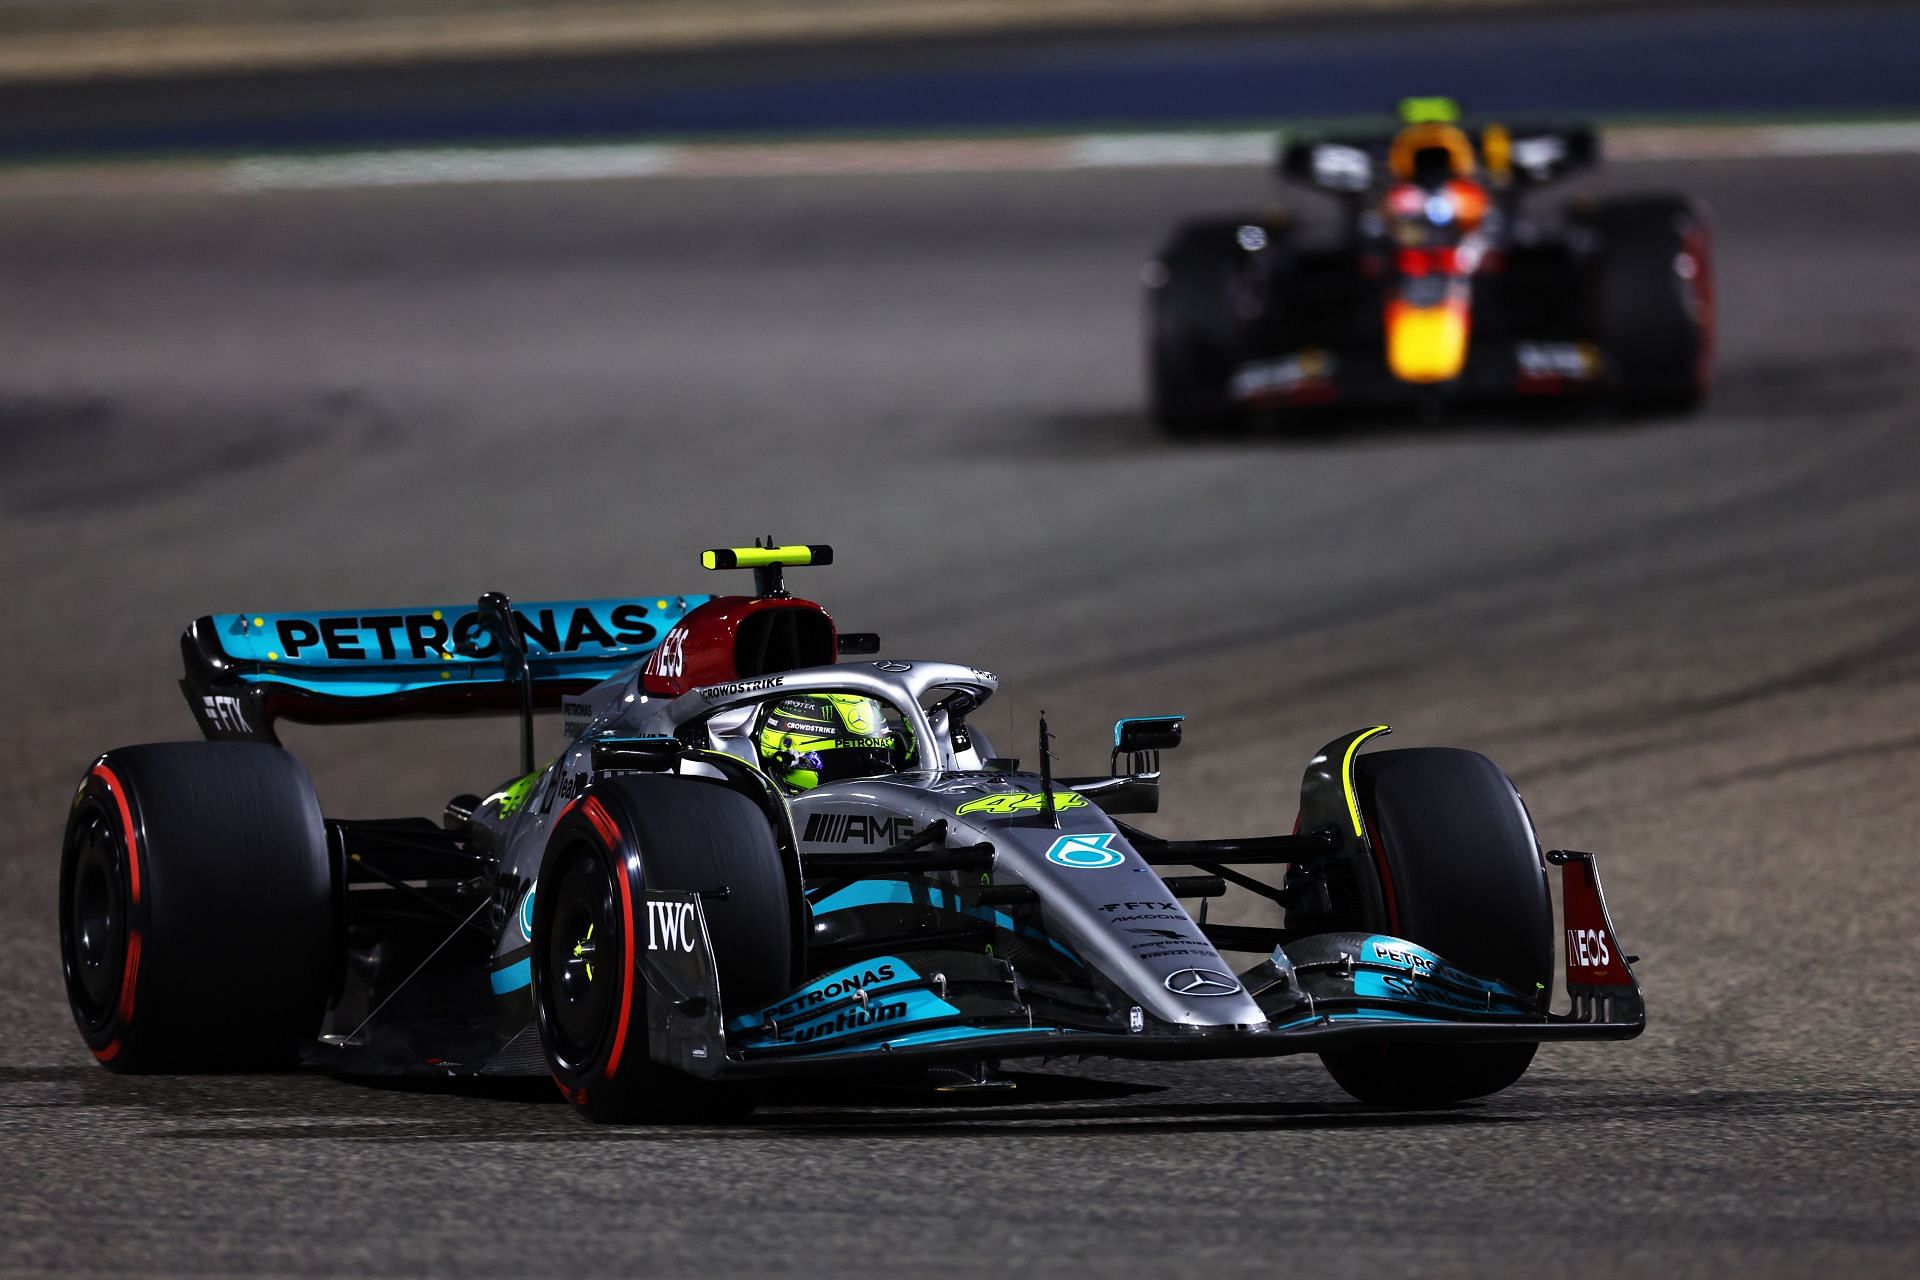 Mercedes only had the third-fastest car on the grid in Bahrain